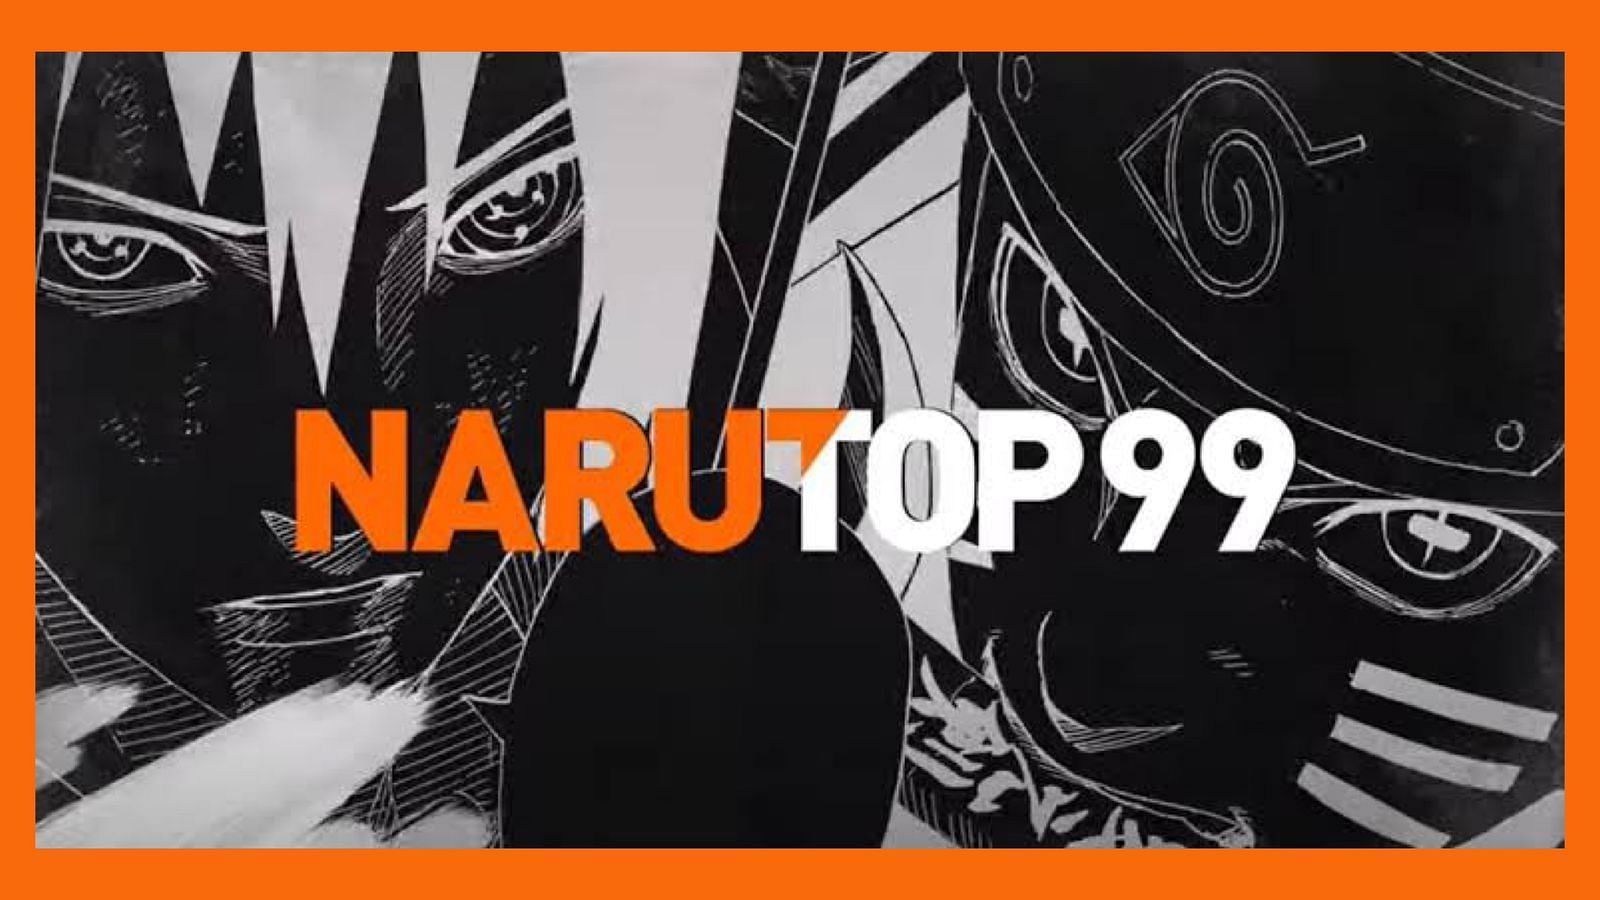 NARUTO OFFICIAL on X: Q. What is the #NARUTOP99 Worldwide Character  Popularity Vote? A. Find out here!    / X